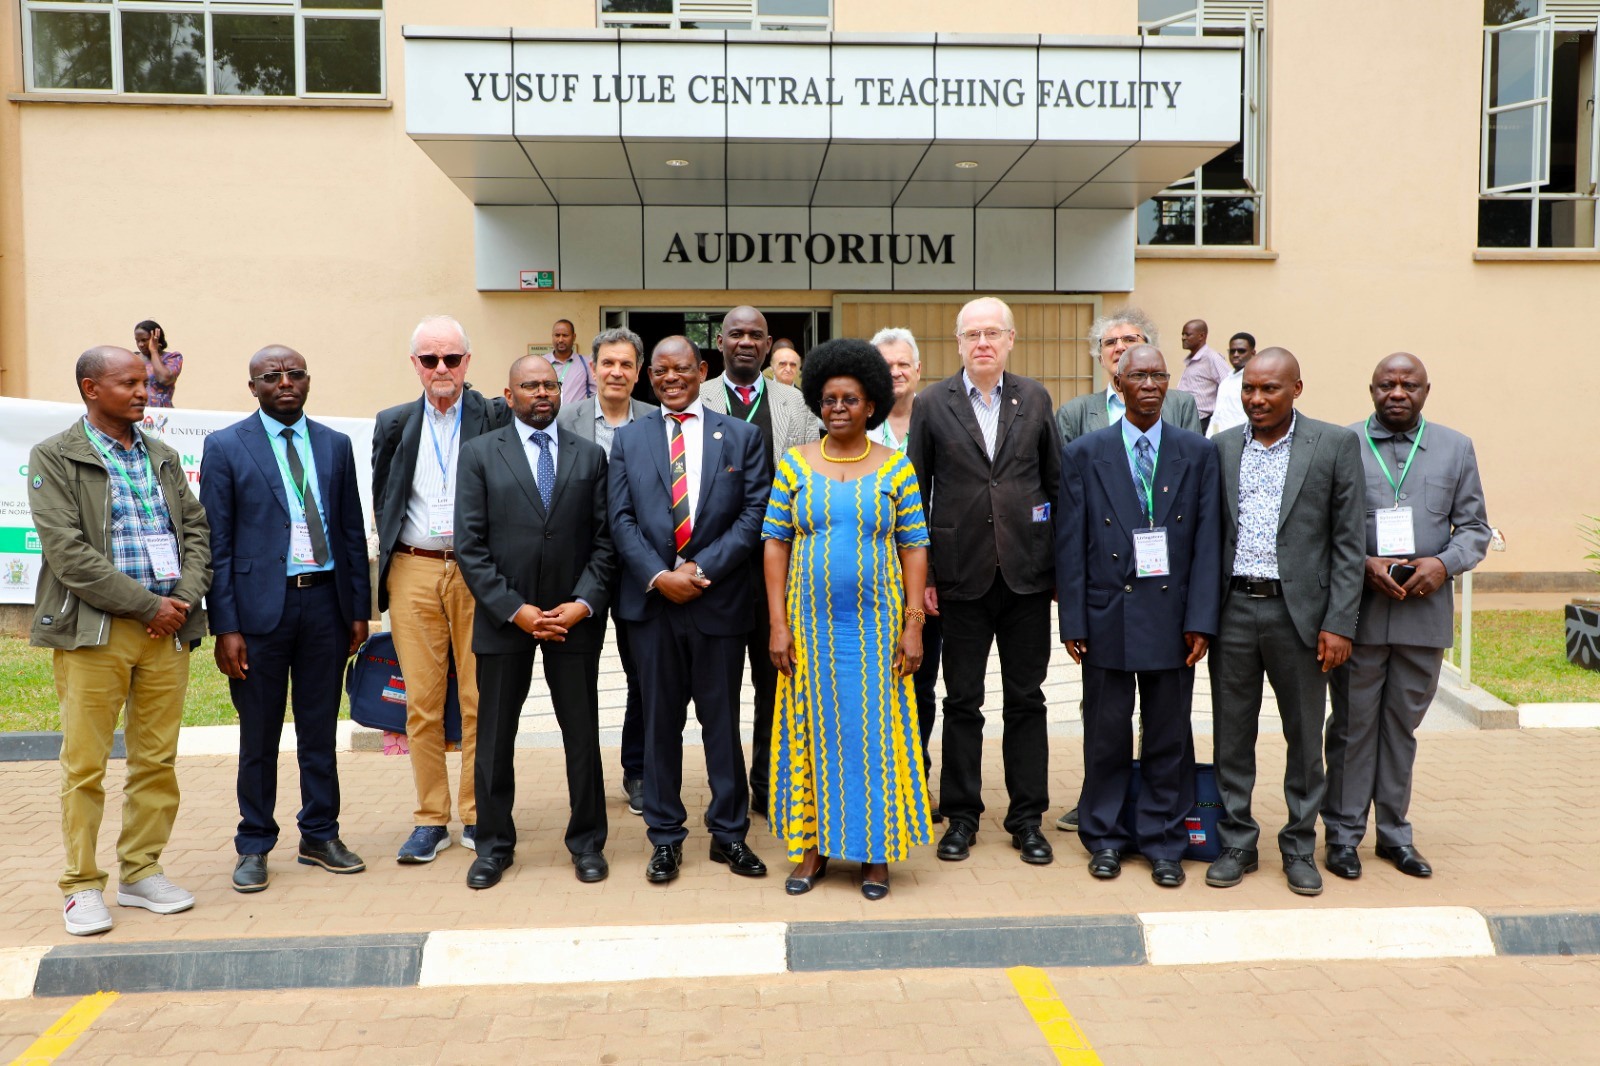 The four-day Joint African-NORDIC Conference in Mathematics commenced on 1st August 2023 with an opening ceremony presided over by the Minister of Science, Technology and Innovation, Hon. Dr. Monica Musenero Masanza. The conference is taking place at Makerere University, Yusuf Lule Central Teaching Facility and it is being attended by academics from 15 countries. Kampala Uganda, East Africa.